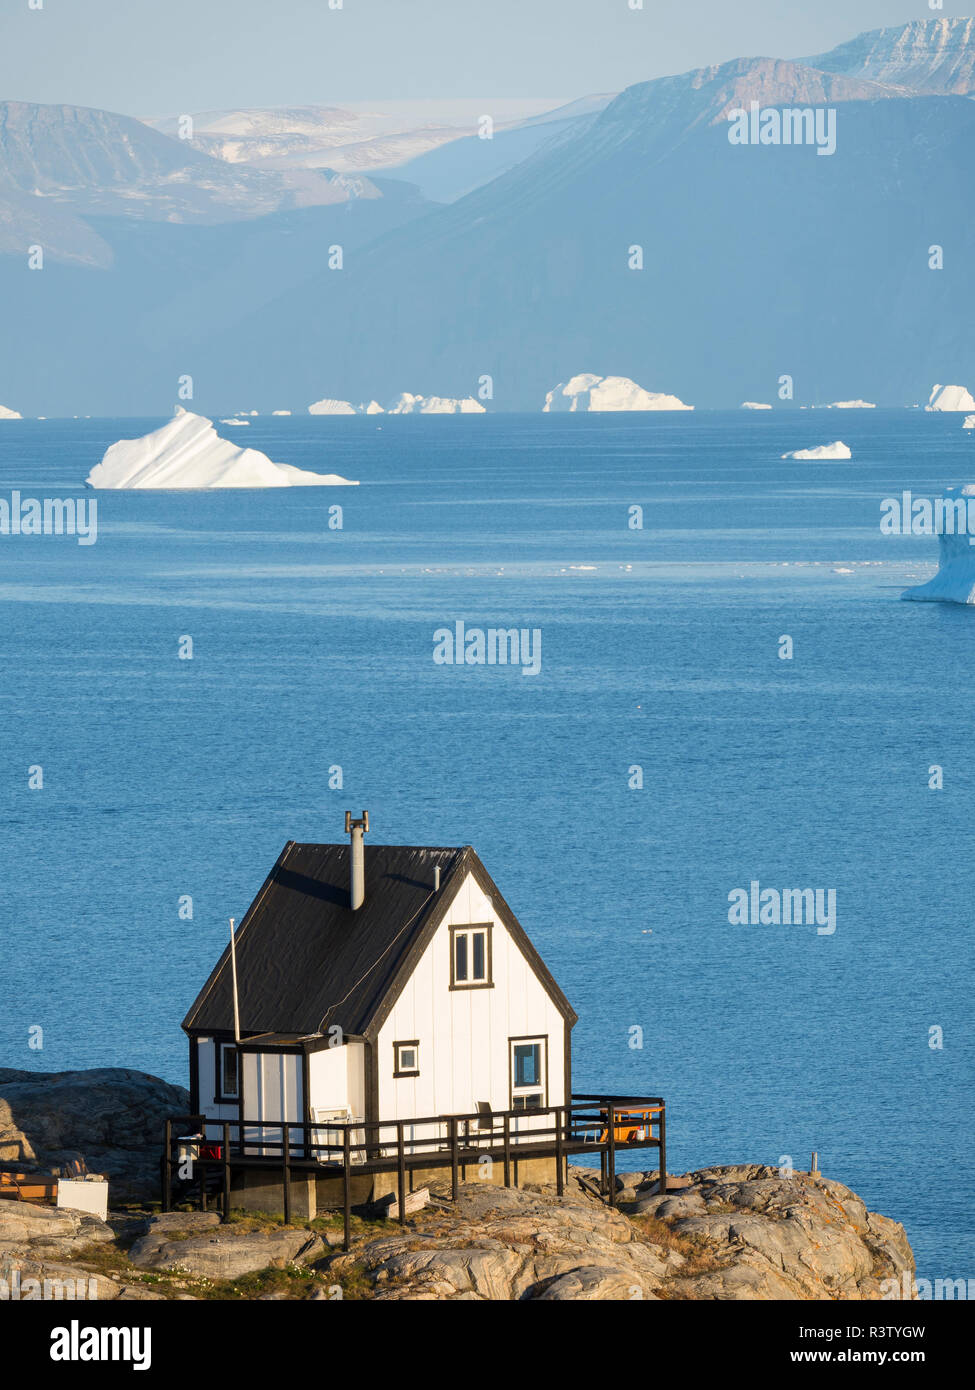 Small town of Uummannaq and glaciated Nuussuaq Peninsula in the background. Greenland, Denmark (Editorial Use Only) Stock Photo